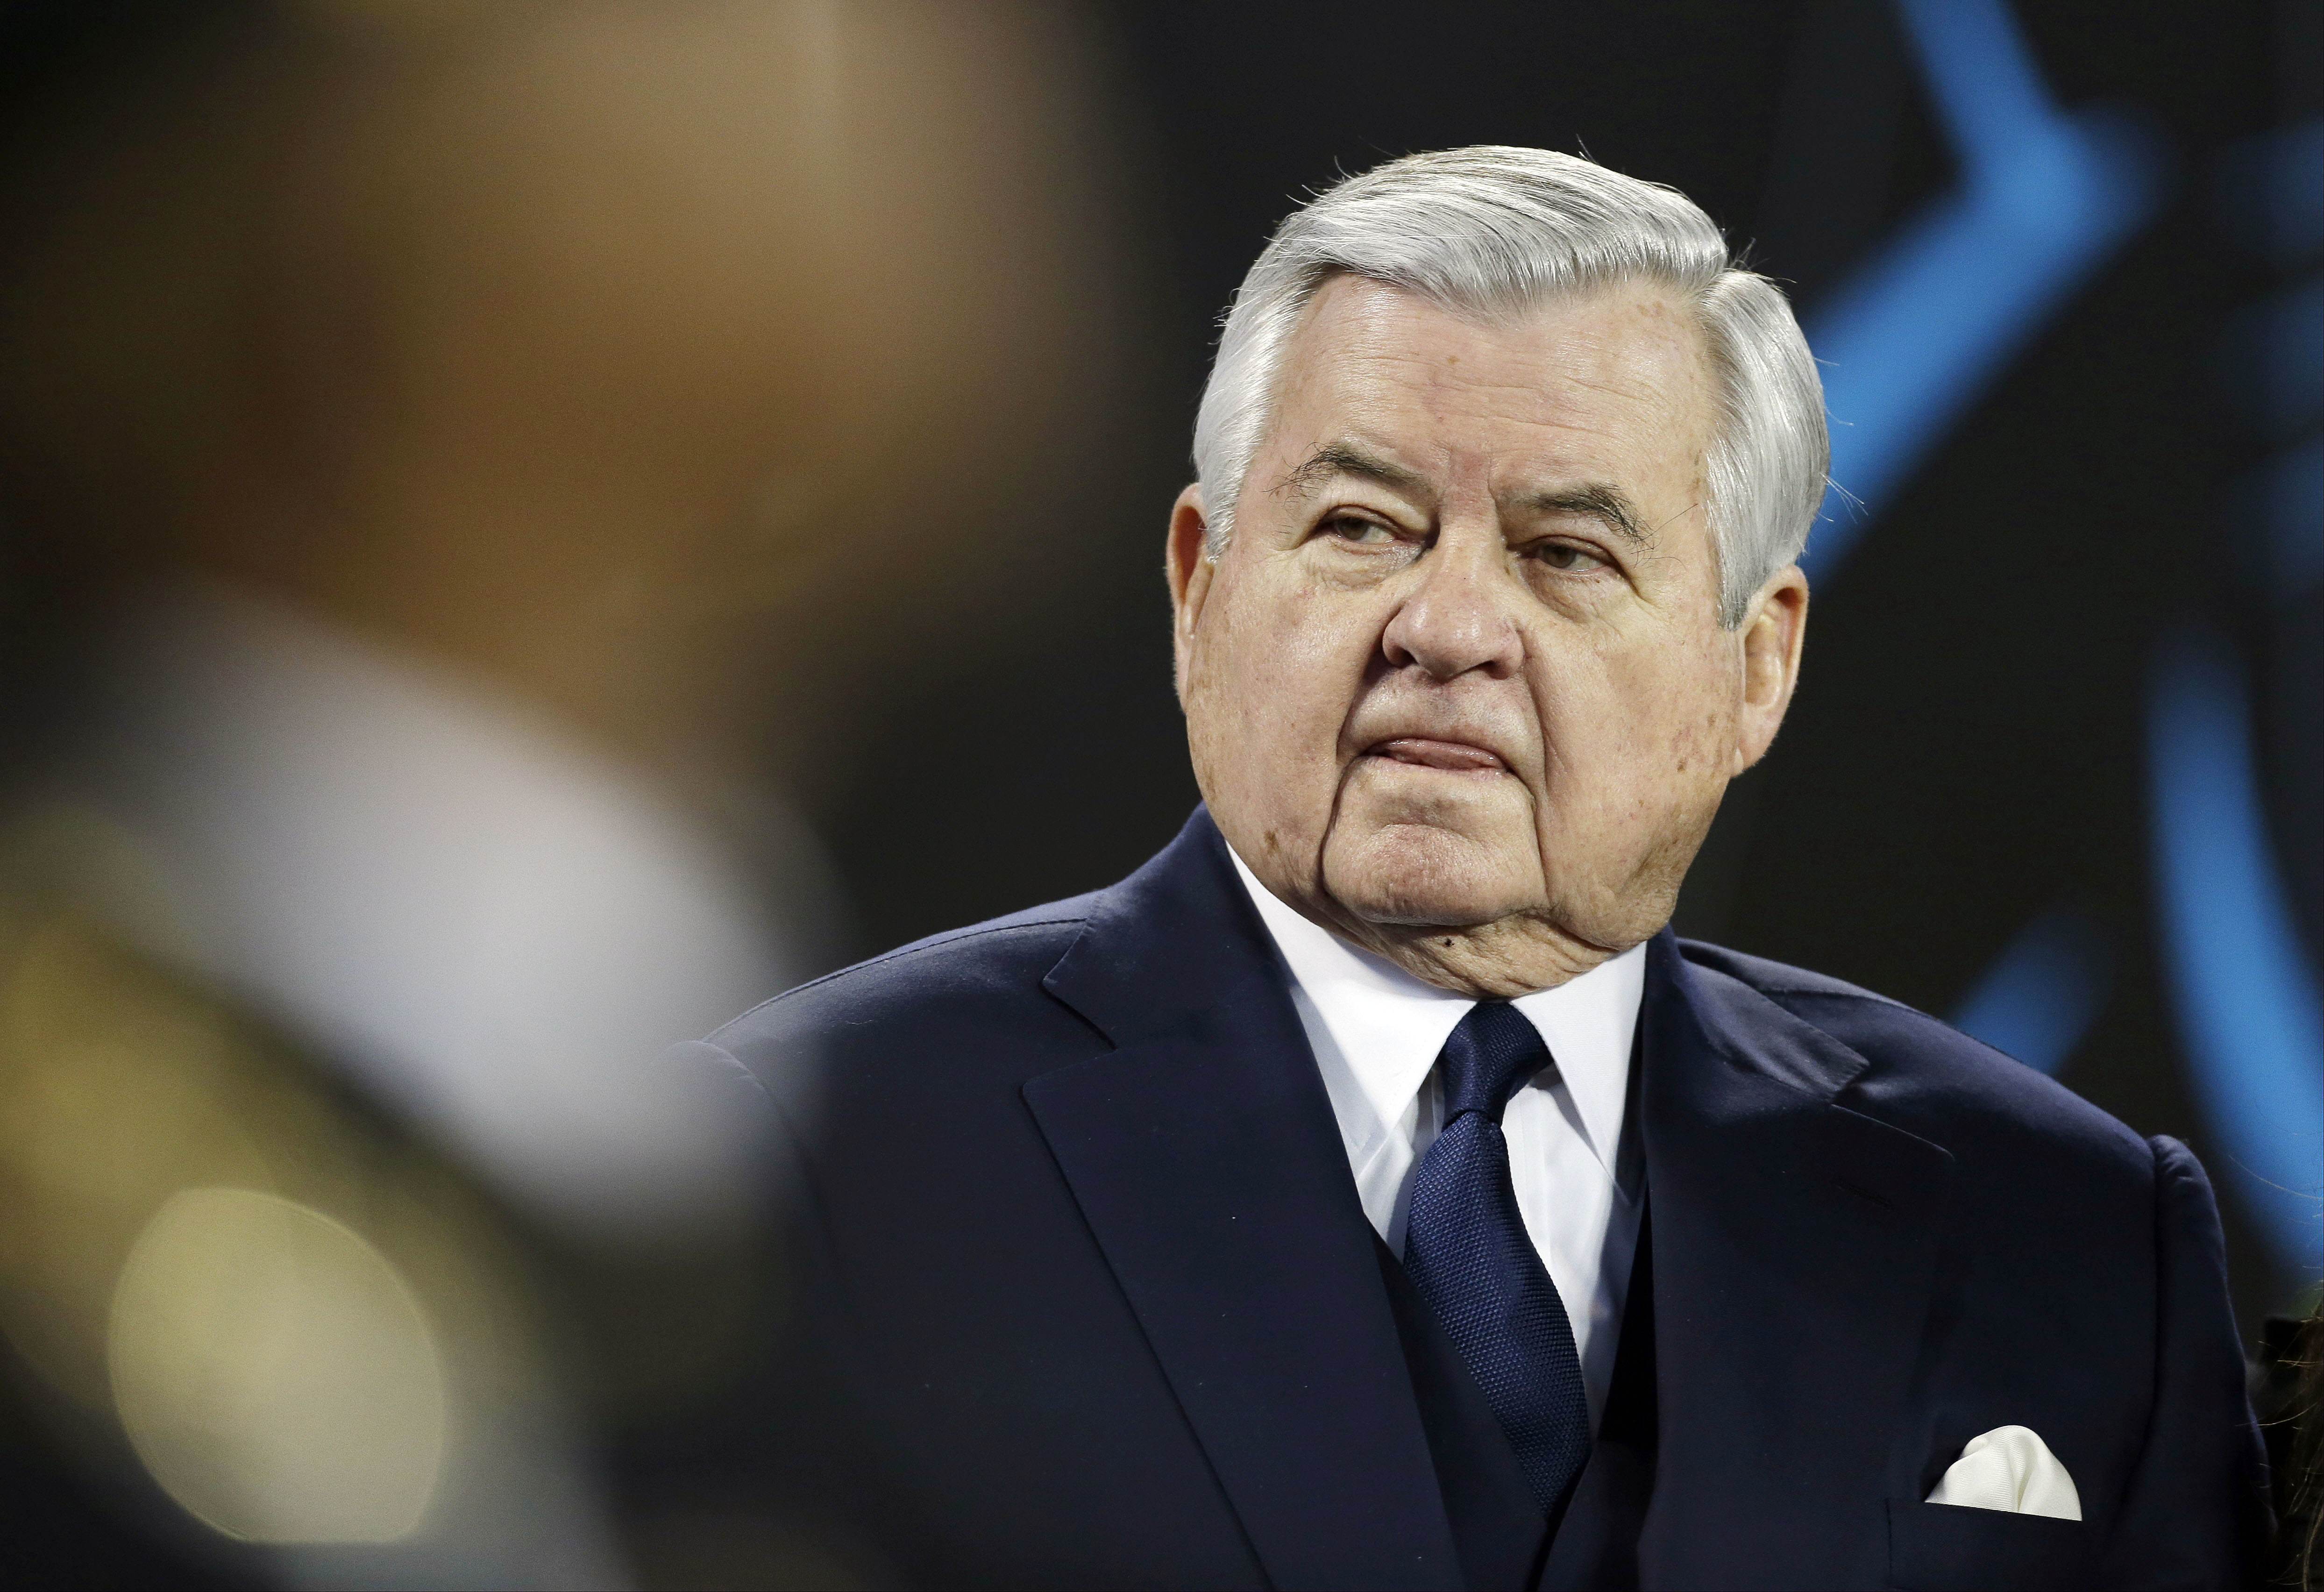 Panthers owner Richardson selling NFL team amid misconduct allegations